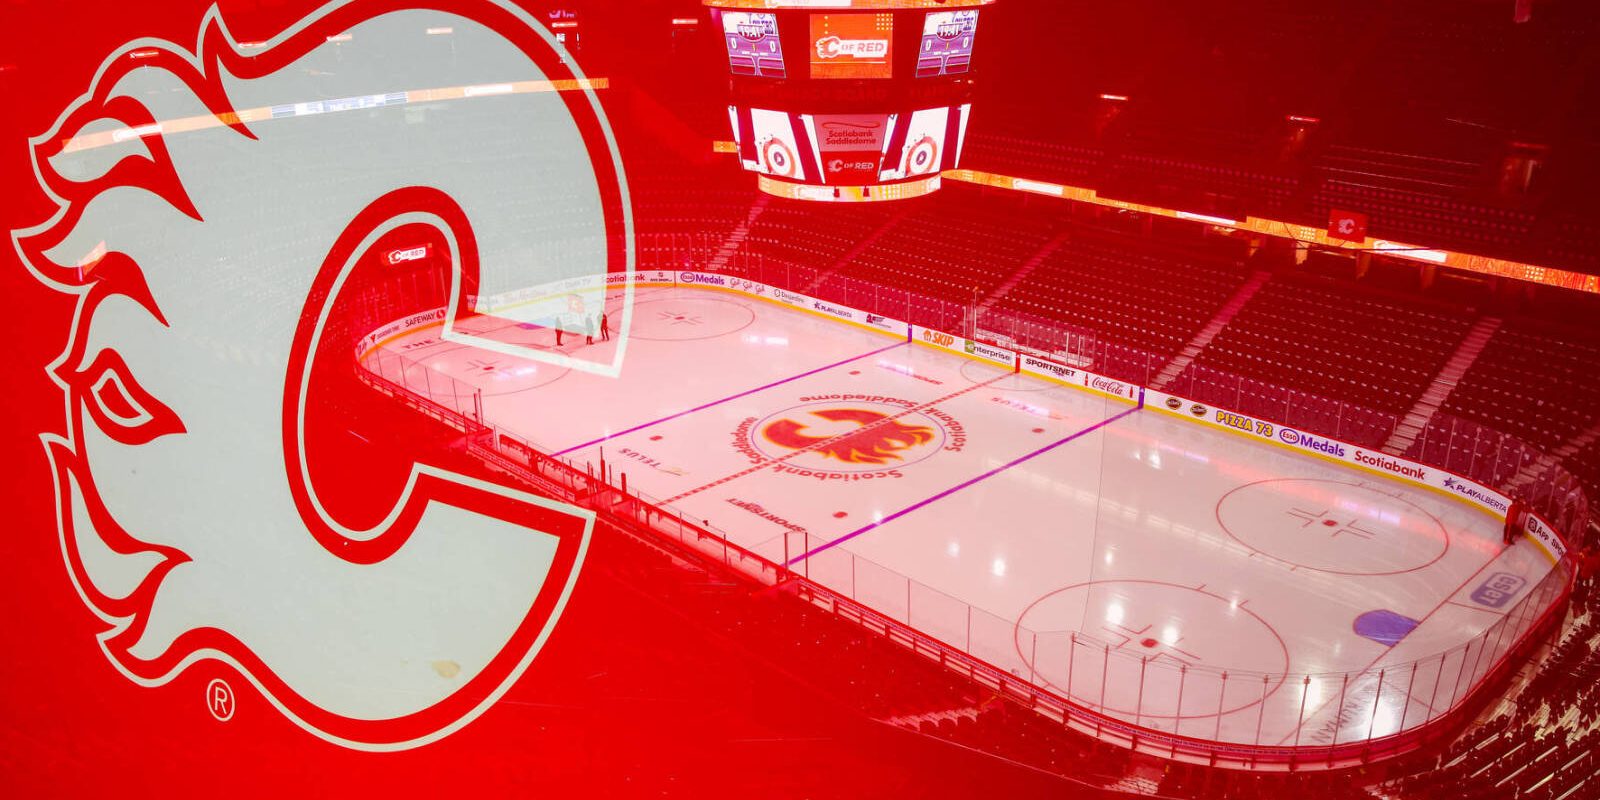 Sep 29, 2023; Calgary, Alberta, CAN;  (Note: This image was created in-camera with multiple exposure.) General view of the arena prior to the game between the Calgary Flames and the Edmonton Oilers at Scotiabank Saddledome. Mandatory Credit: Sergei Belski-USA TODAY Sports